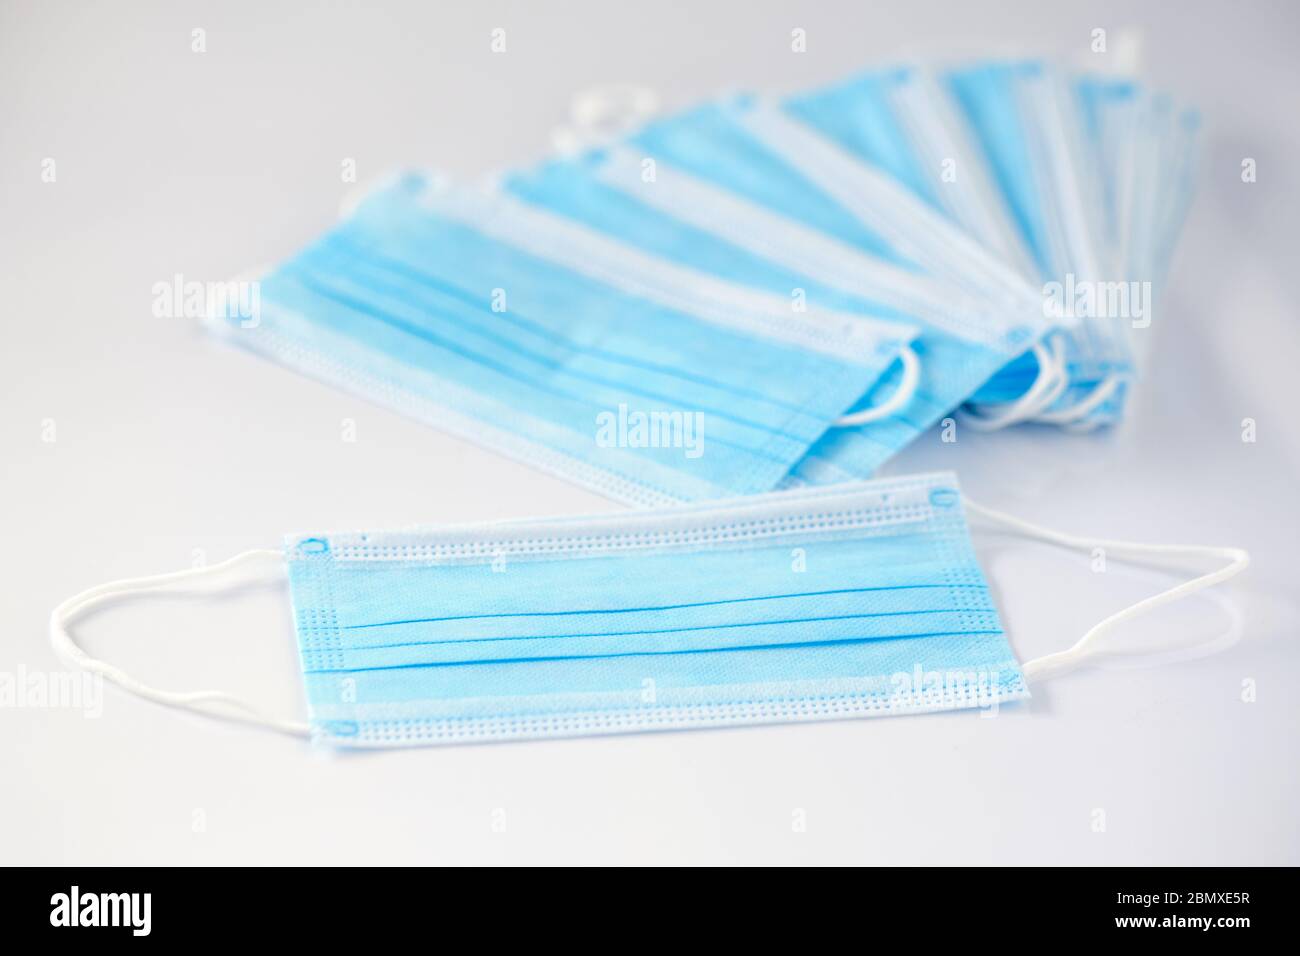 A stack of new unused disposable face masks lying on white background. Seen in Germany in May during corona crisis. Stock Photo